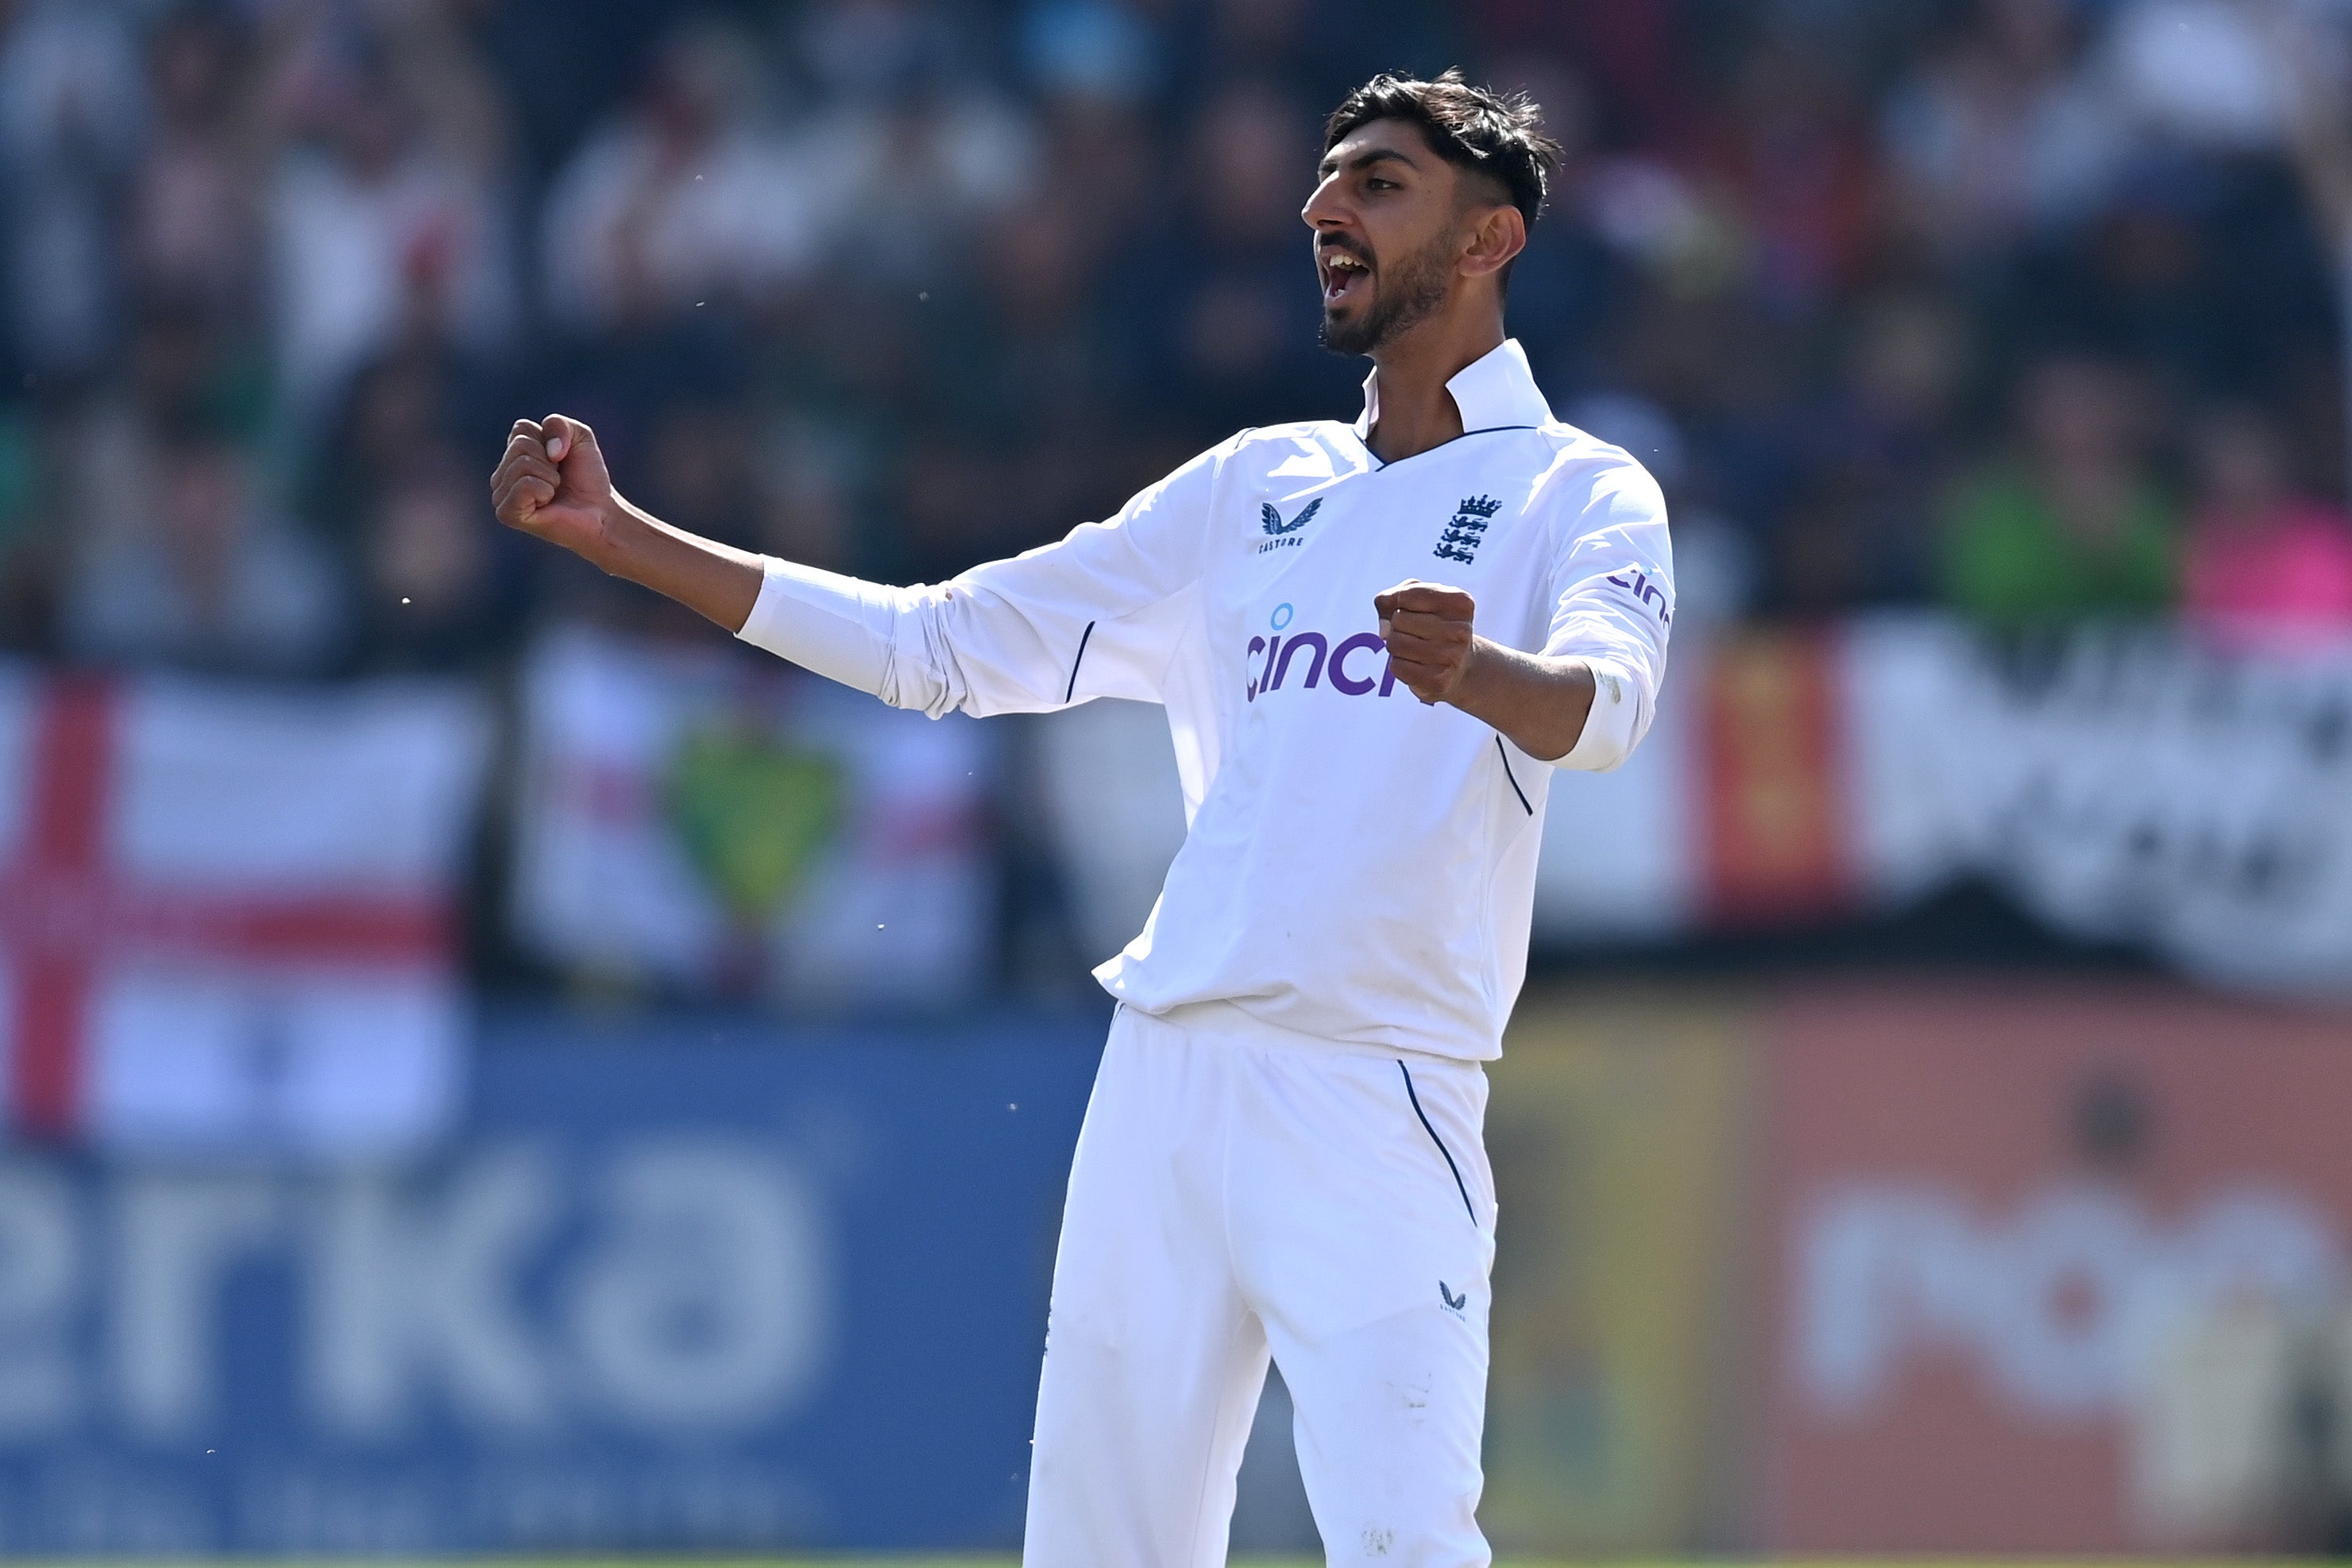 Shoaib Bashir has been chosen ahead of Jack Leach for England in a surprise decision